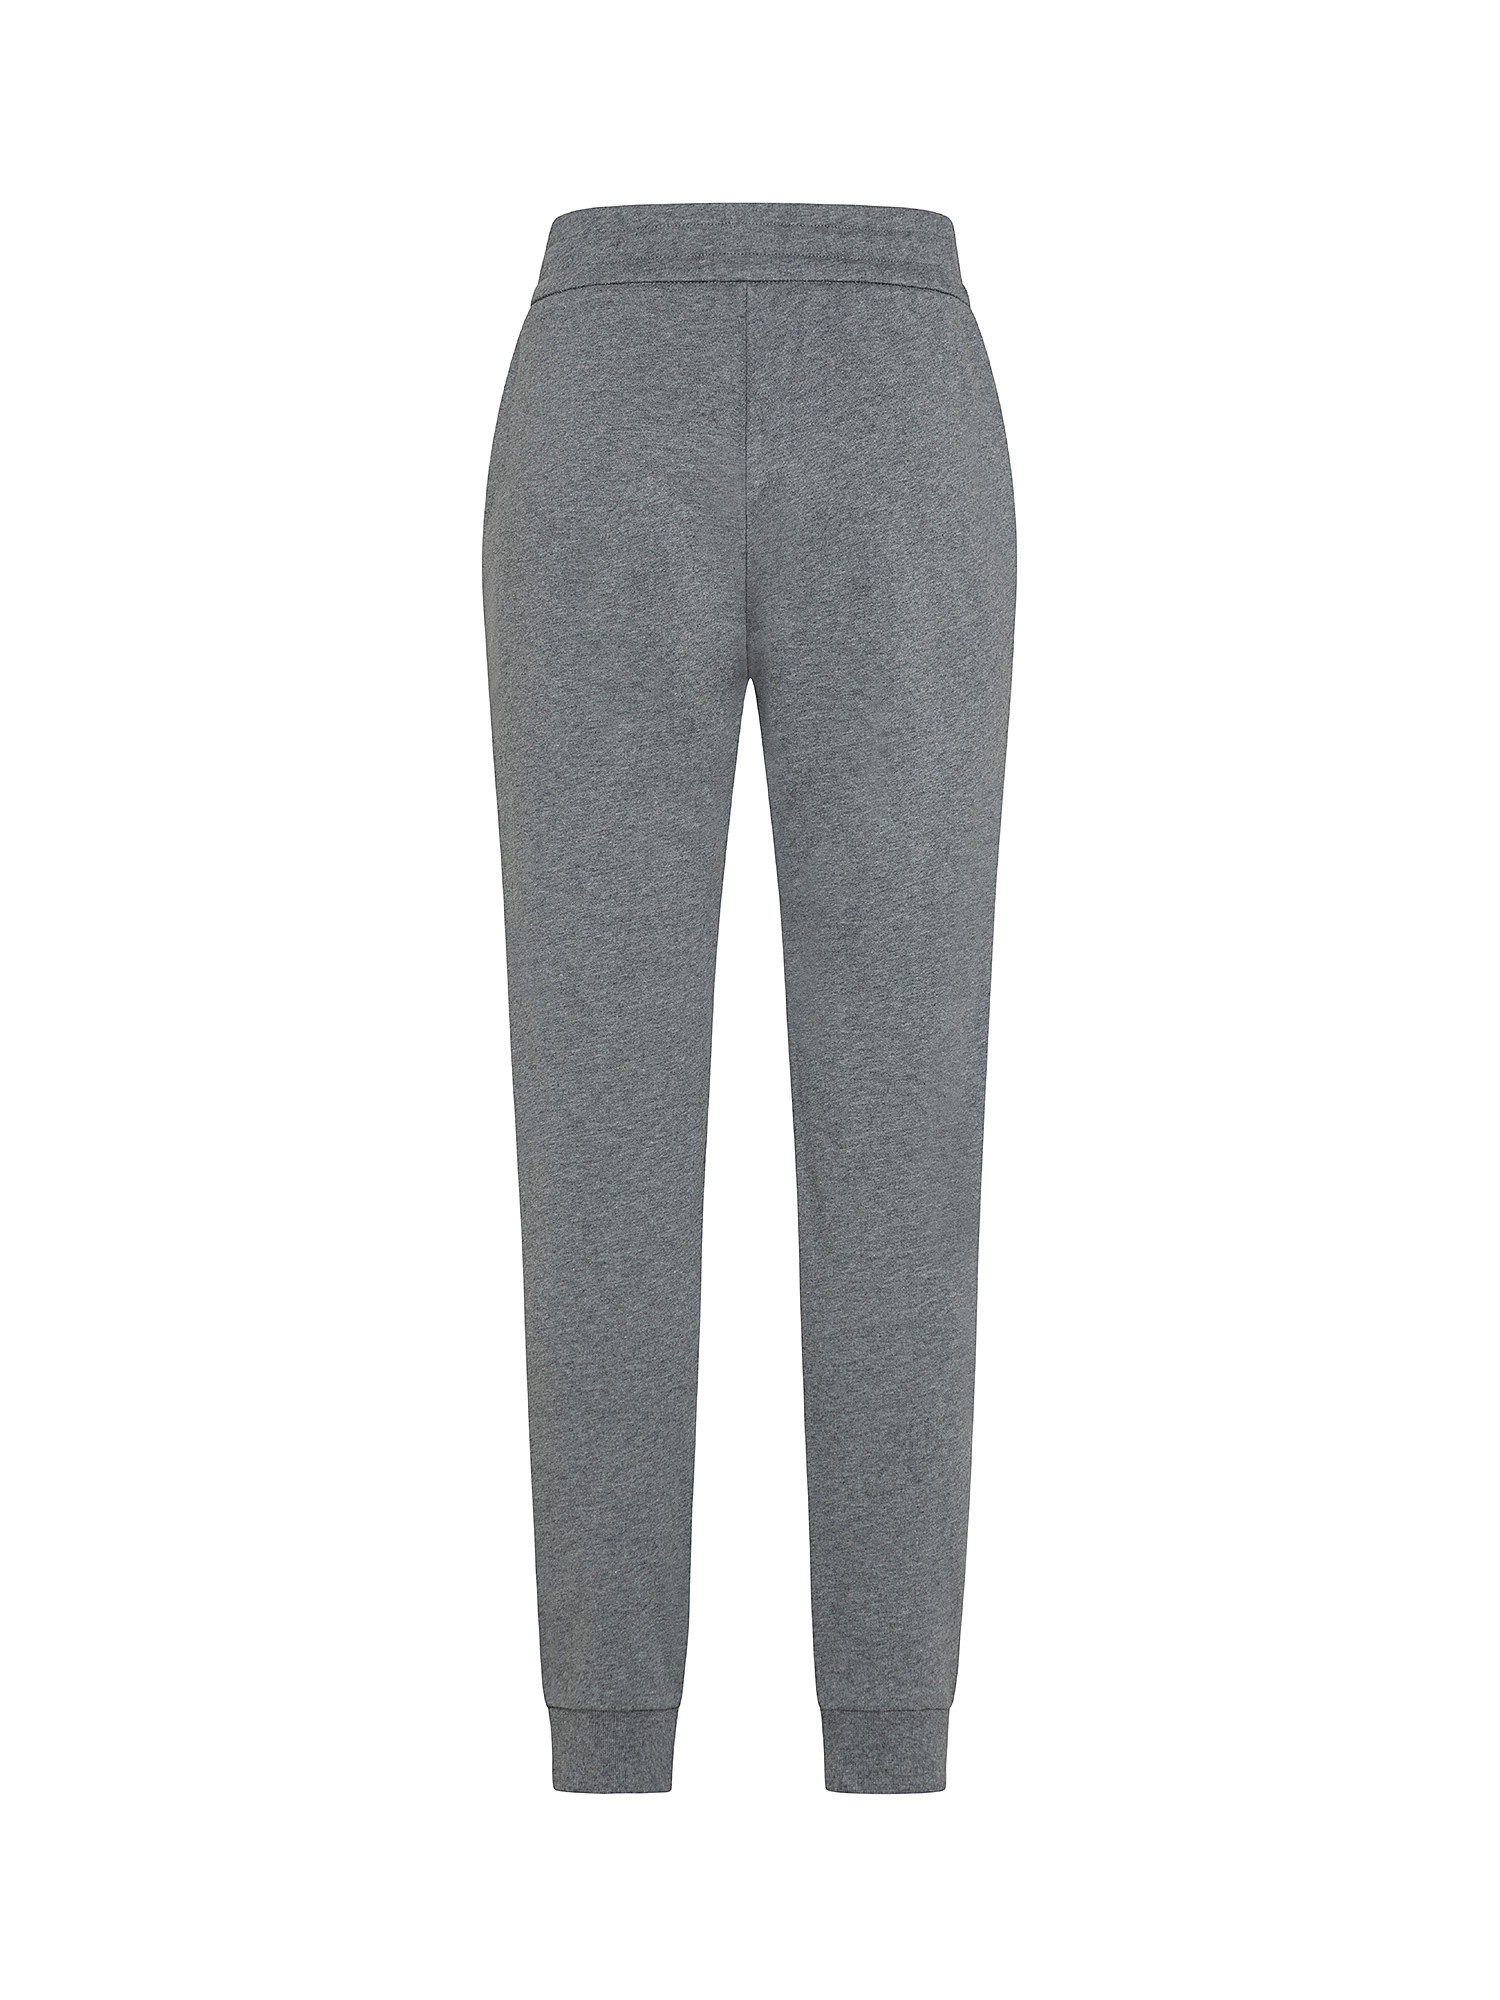 Trousers, Grey, large image number 1